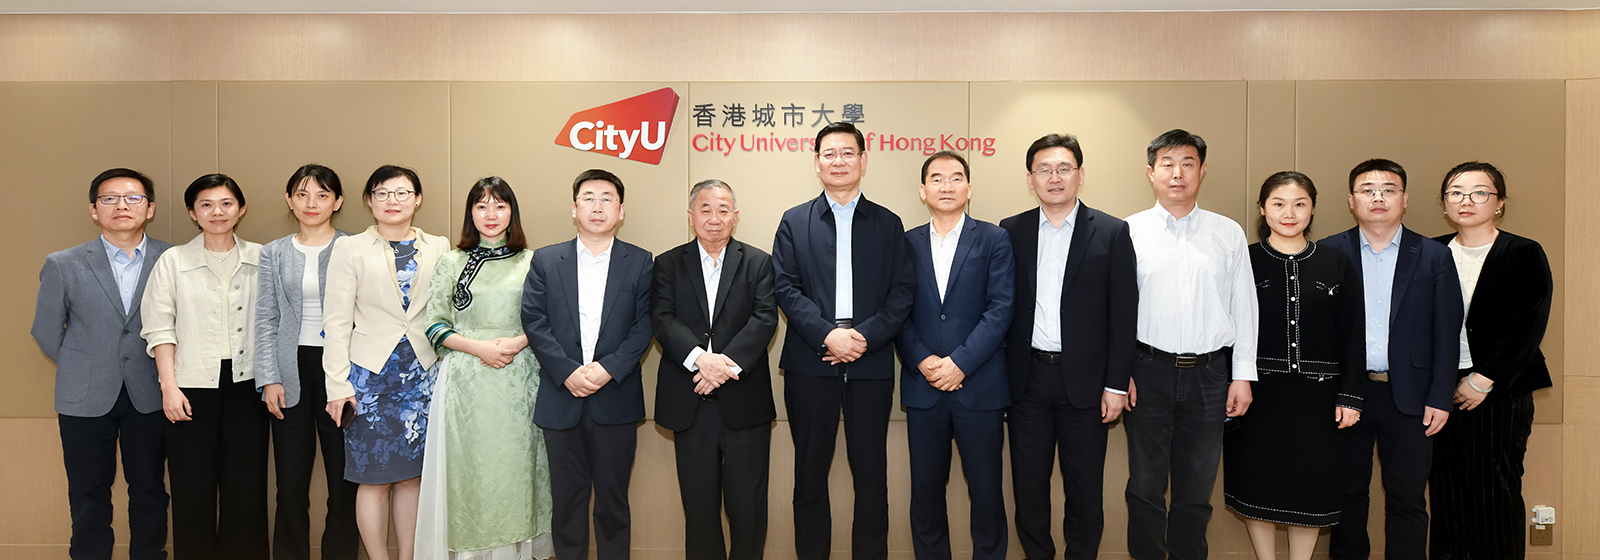 CityUHK’s senior leadership team, including President Boey (seventh from left), receives a delegation led by Mr Wang (seventh from right).